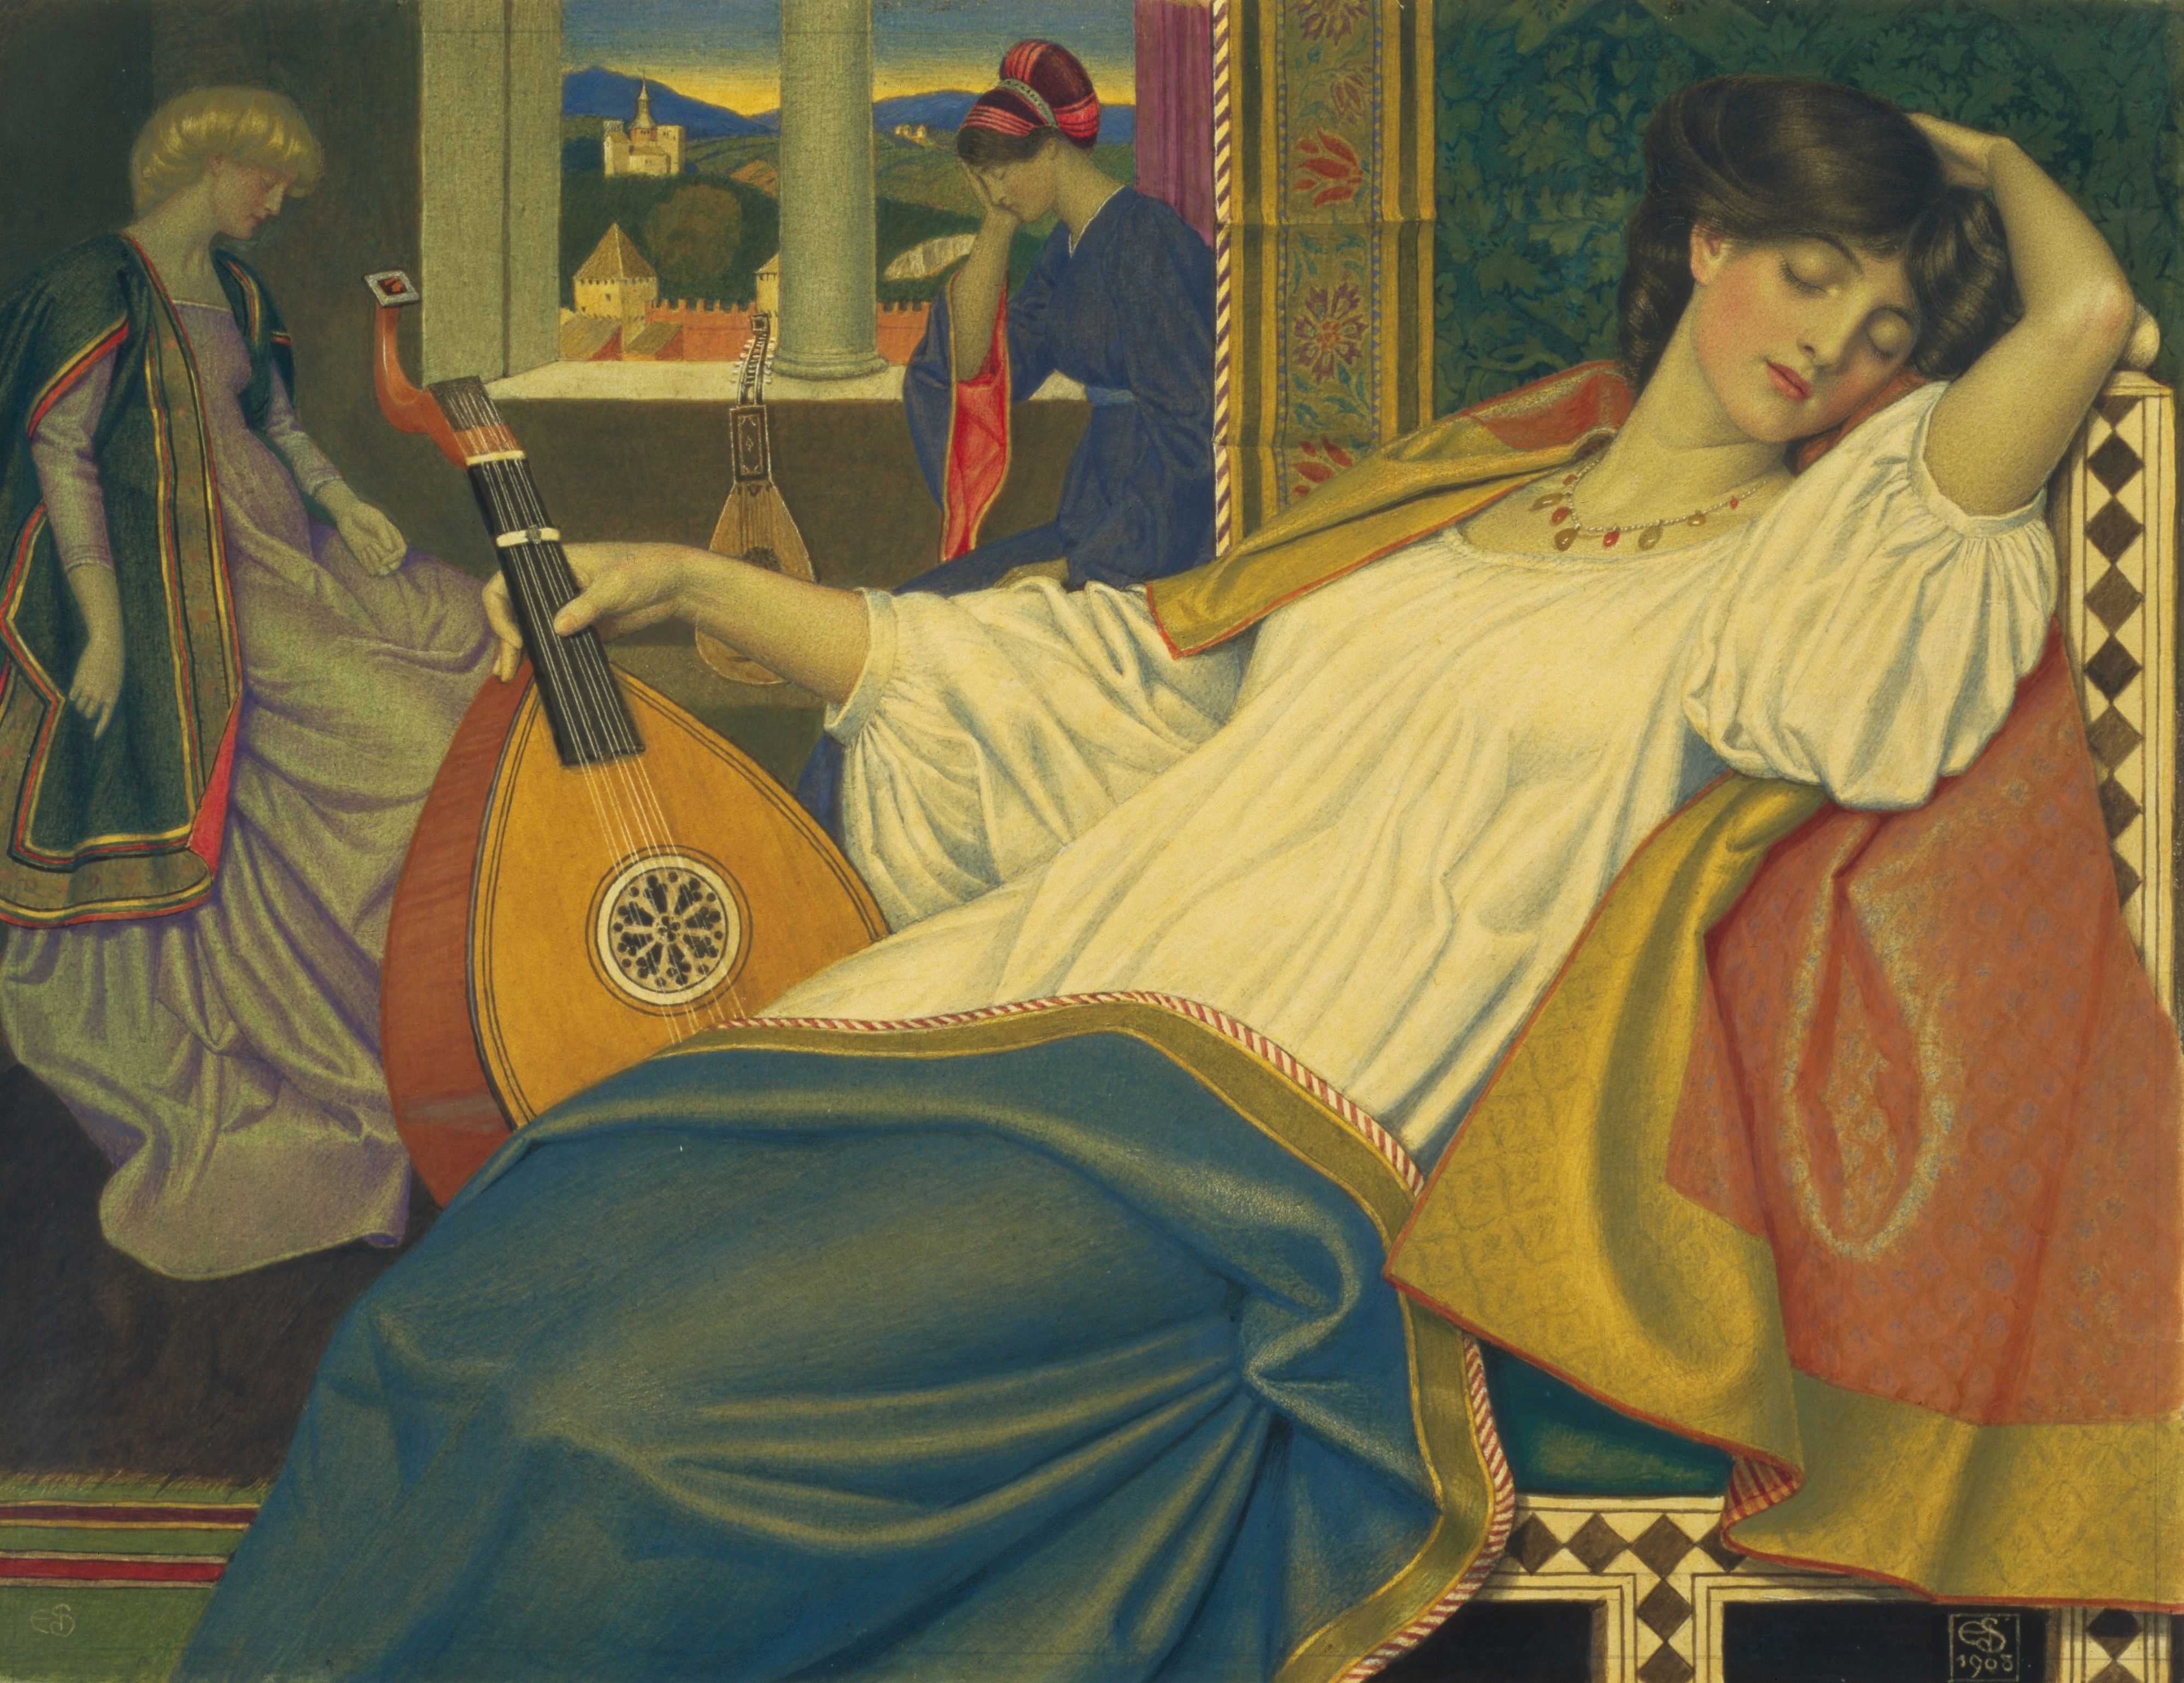 Find out more about Joseph Edward Southall - The Sleeping Beauty